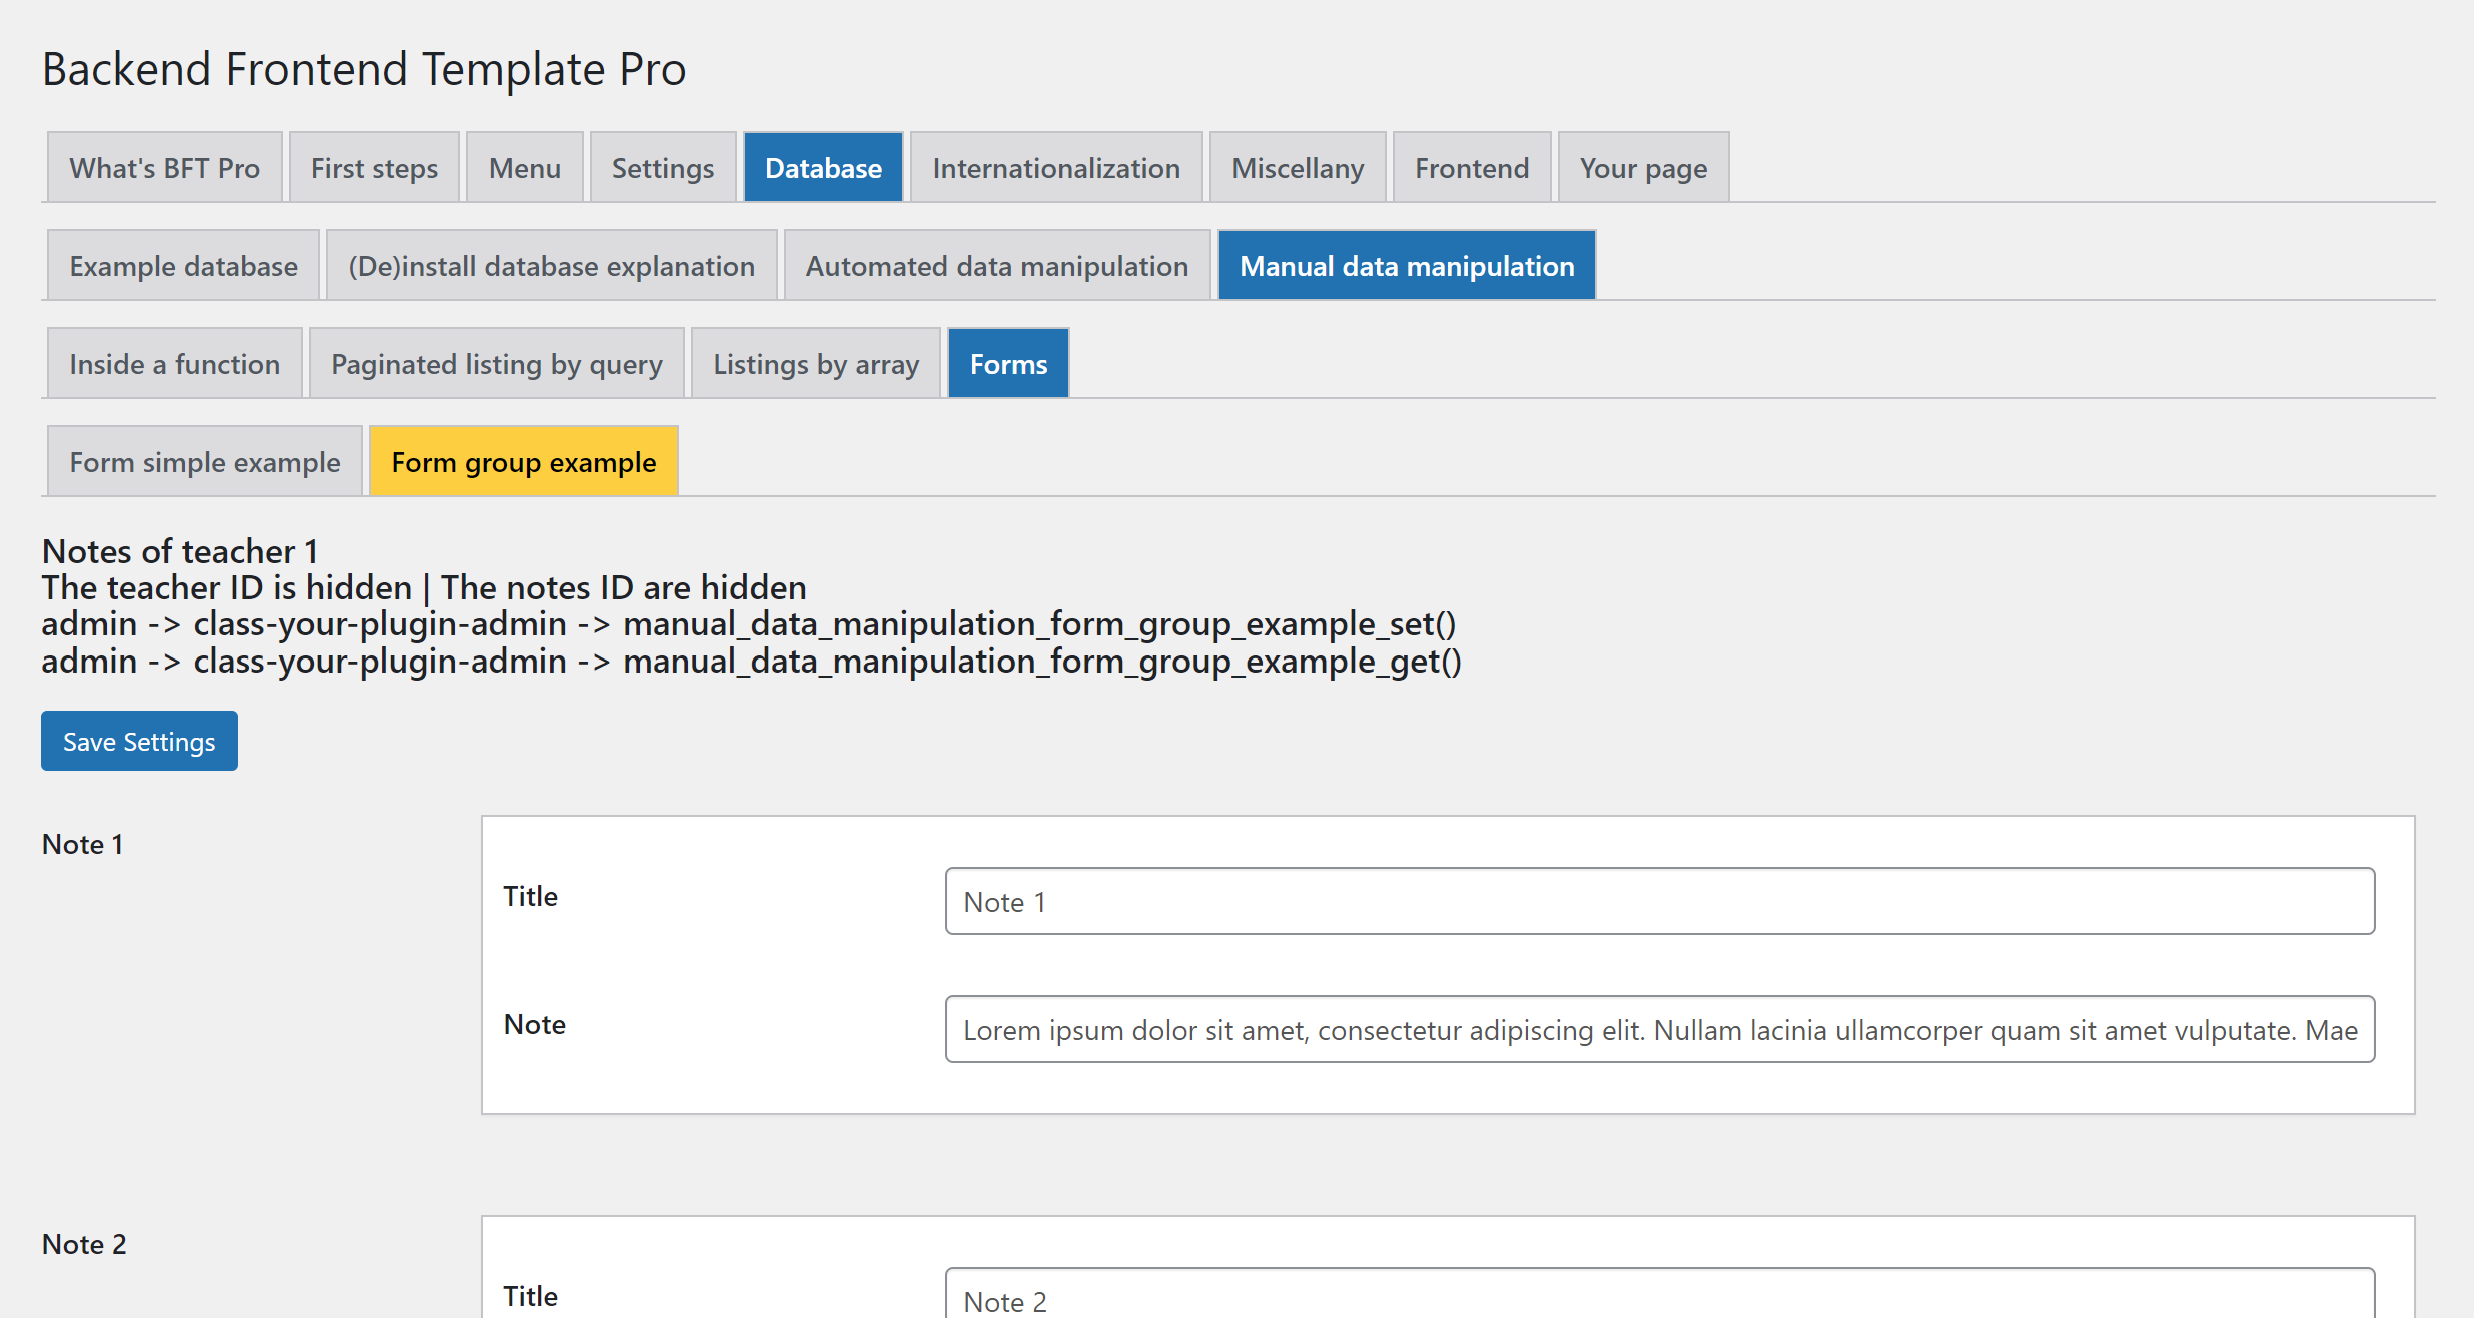 Backend Frontend Template Pro: example of a group form manually declared